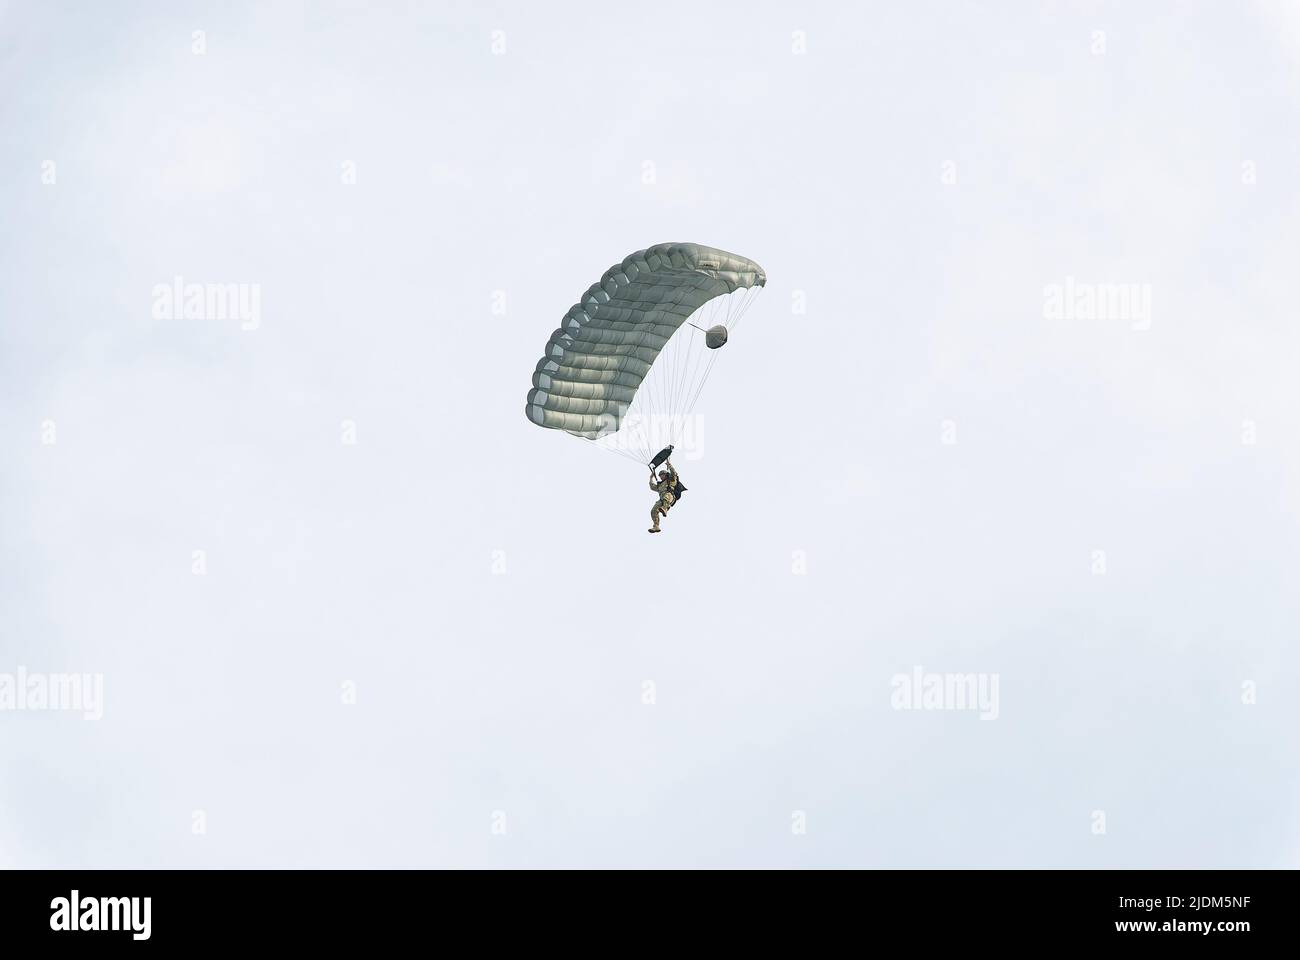 Paratrooper. Photo taken during the parachute jumping show during the Commando Fest in Dziwnów - August 2020. Stock Photo